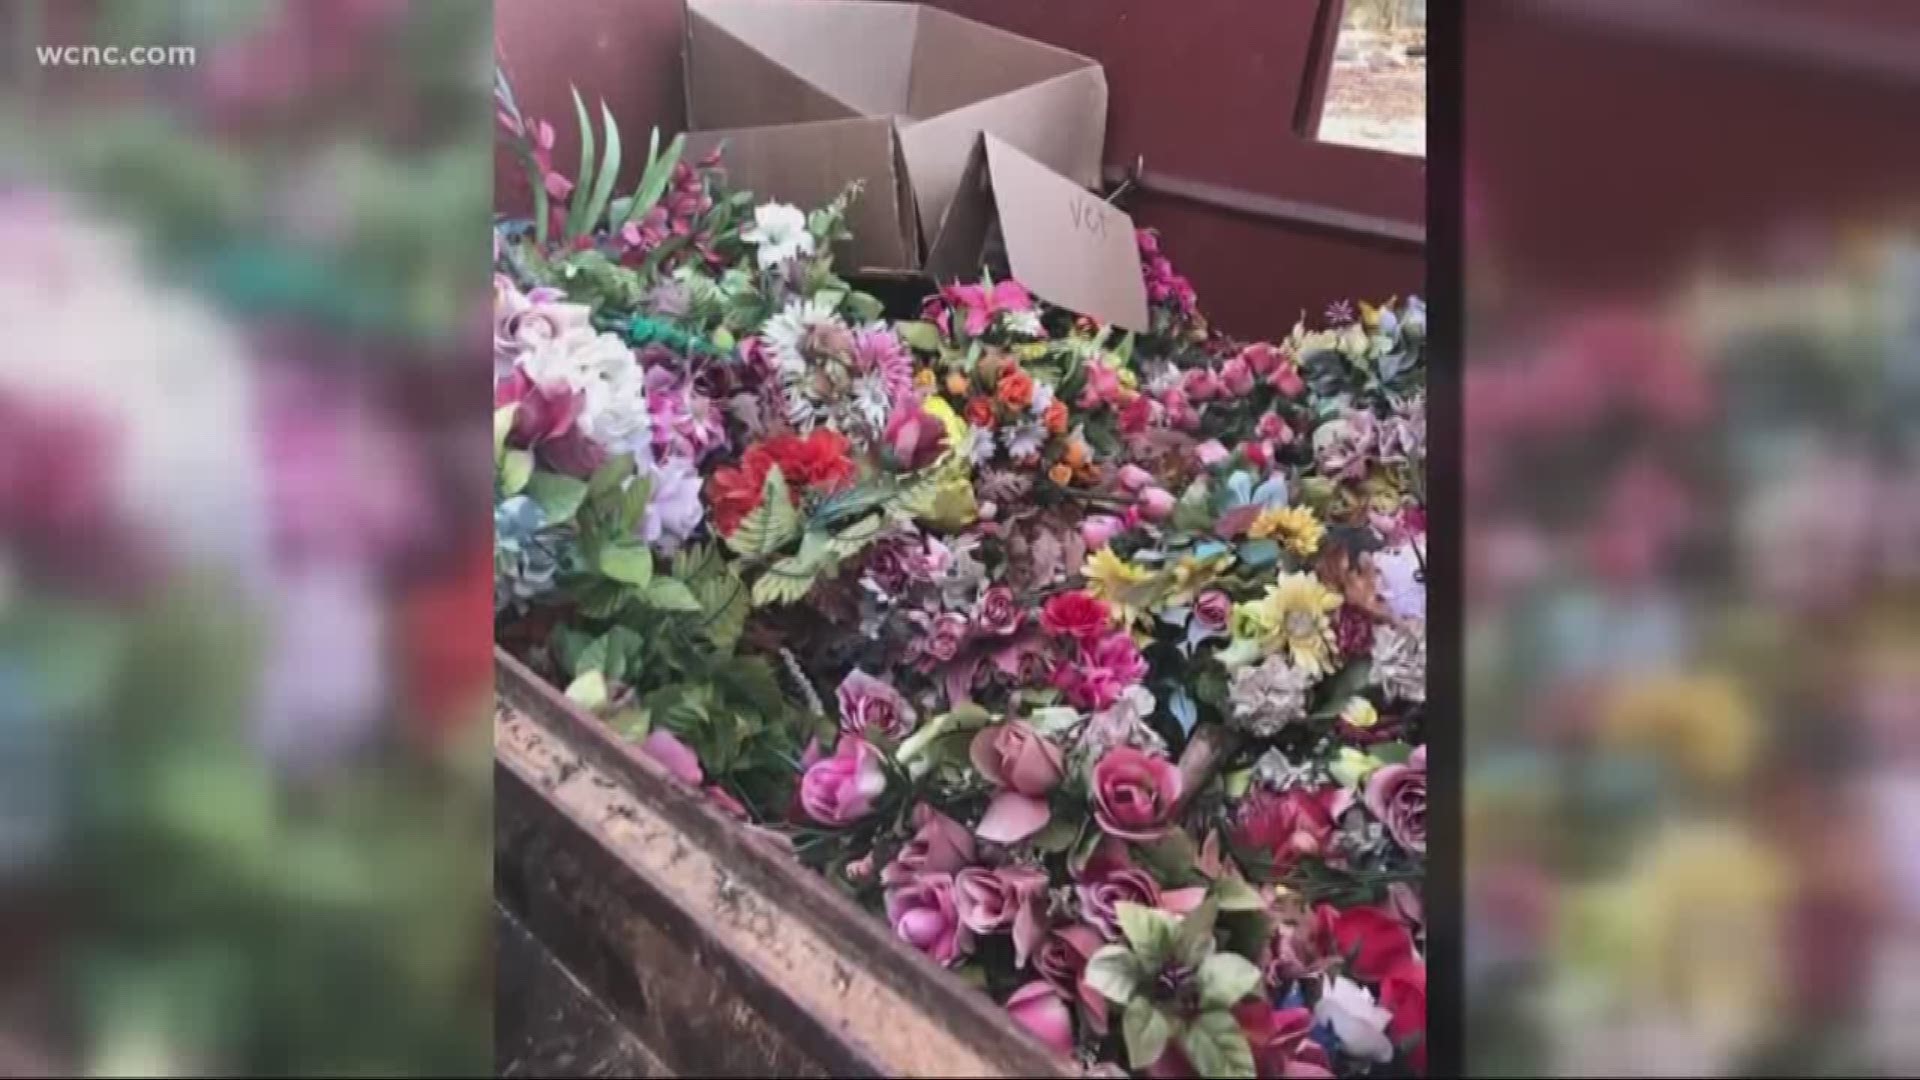 Hundreds of personal items were pulled from graves at a Charlotte cemetery, outraging loved ones who claim they weren't warned.